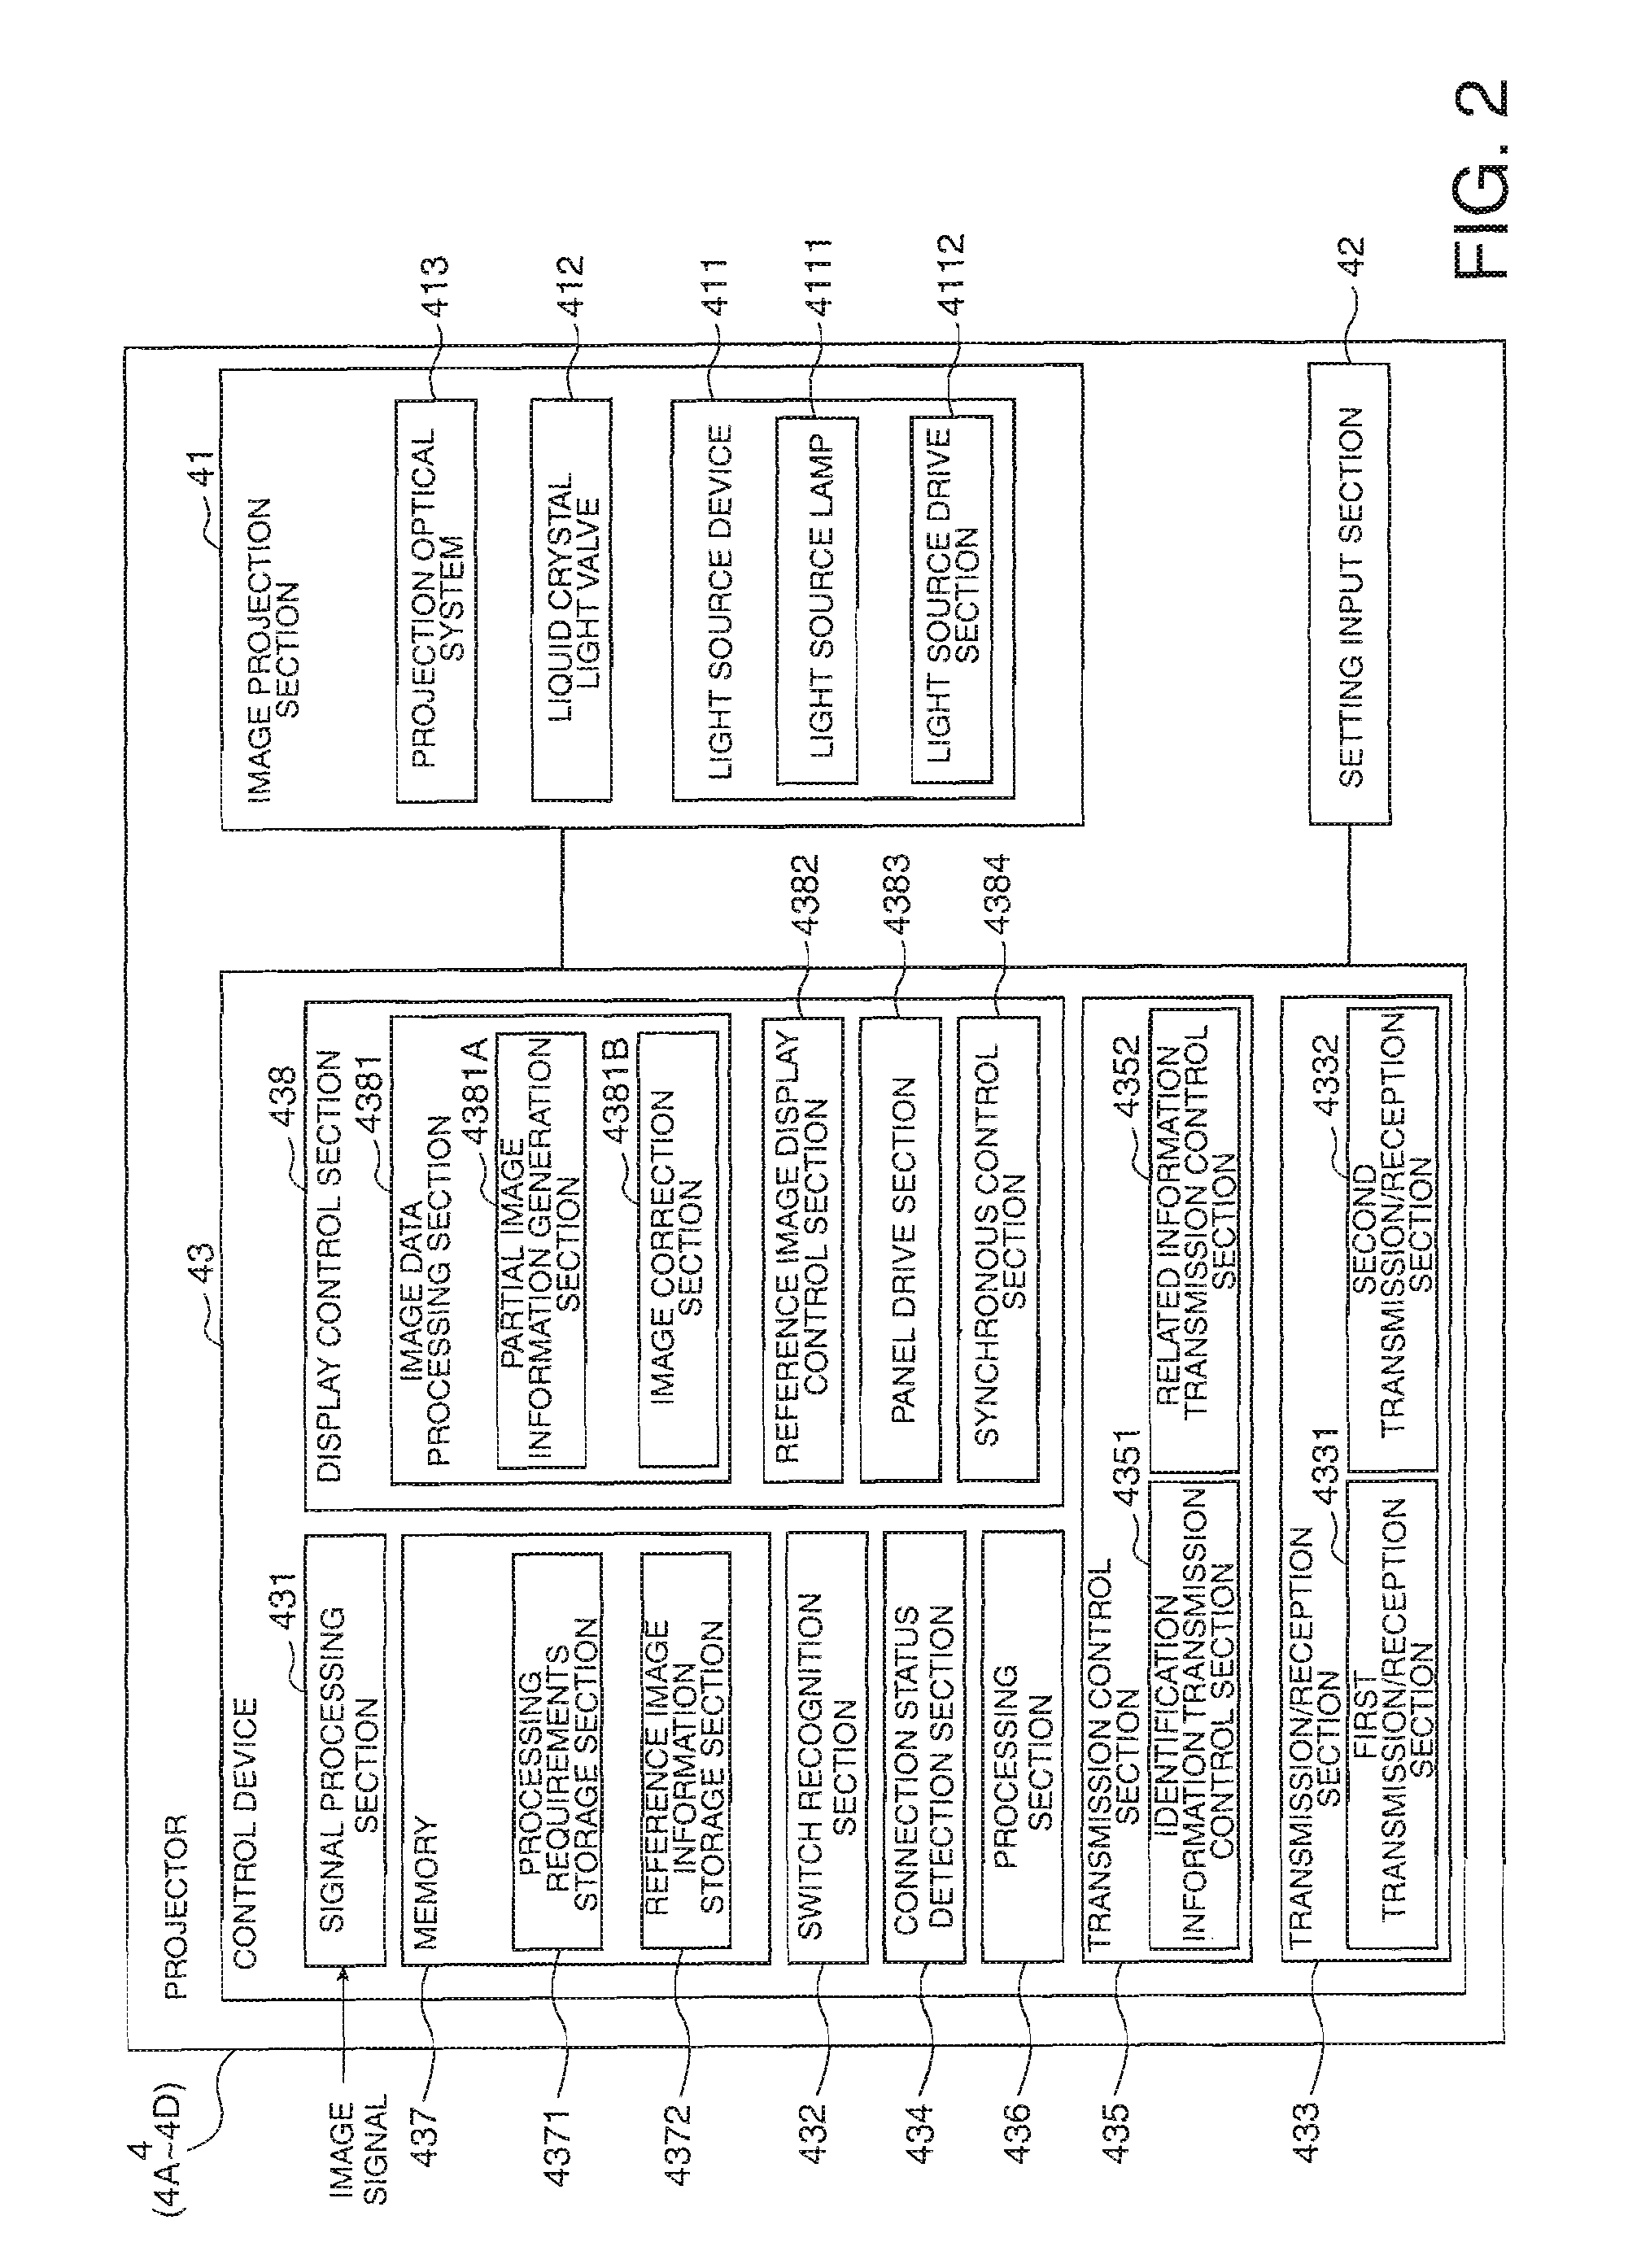 Display device, multi-display system, and image information generation method